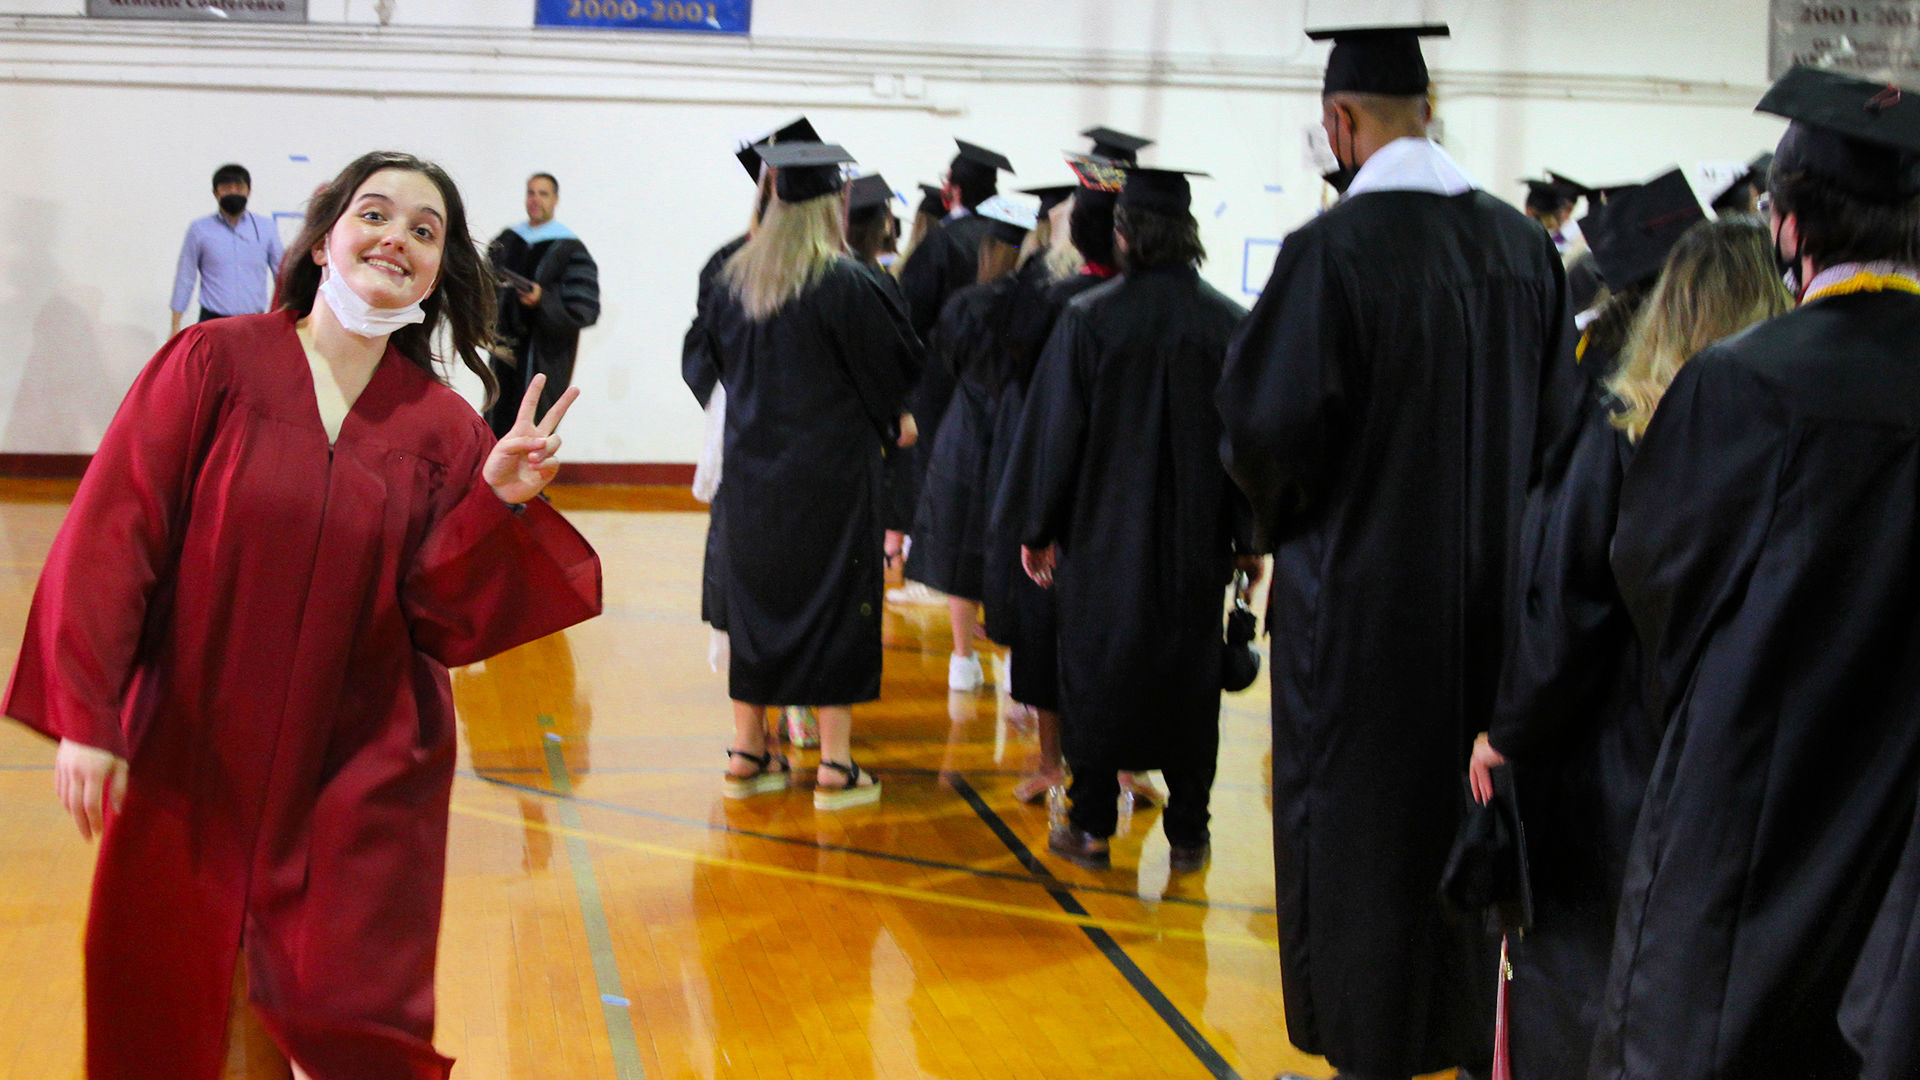 A junior marshal wearing a red robe gives a peace sign to the camera as they walk by lined-up graduates.